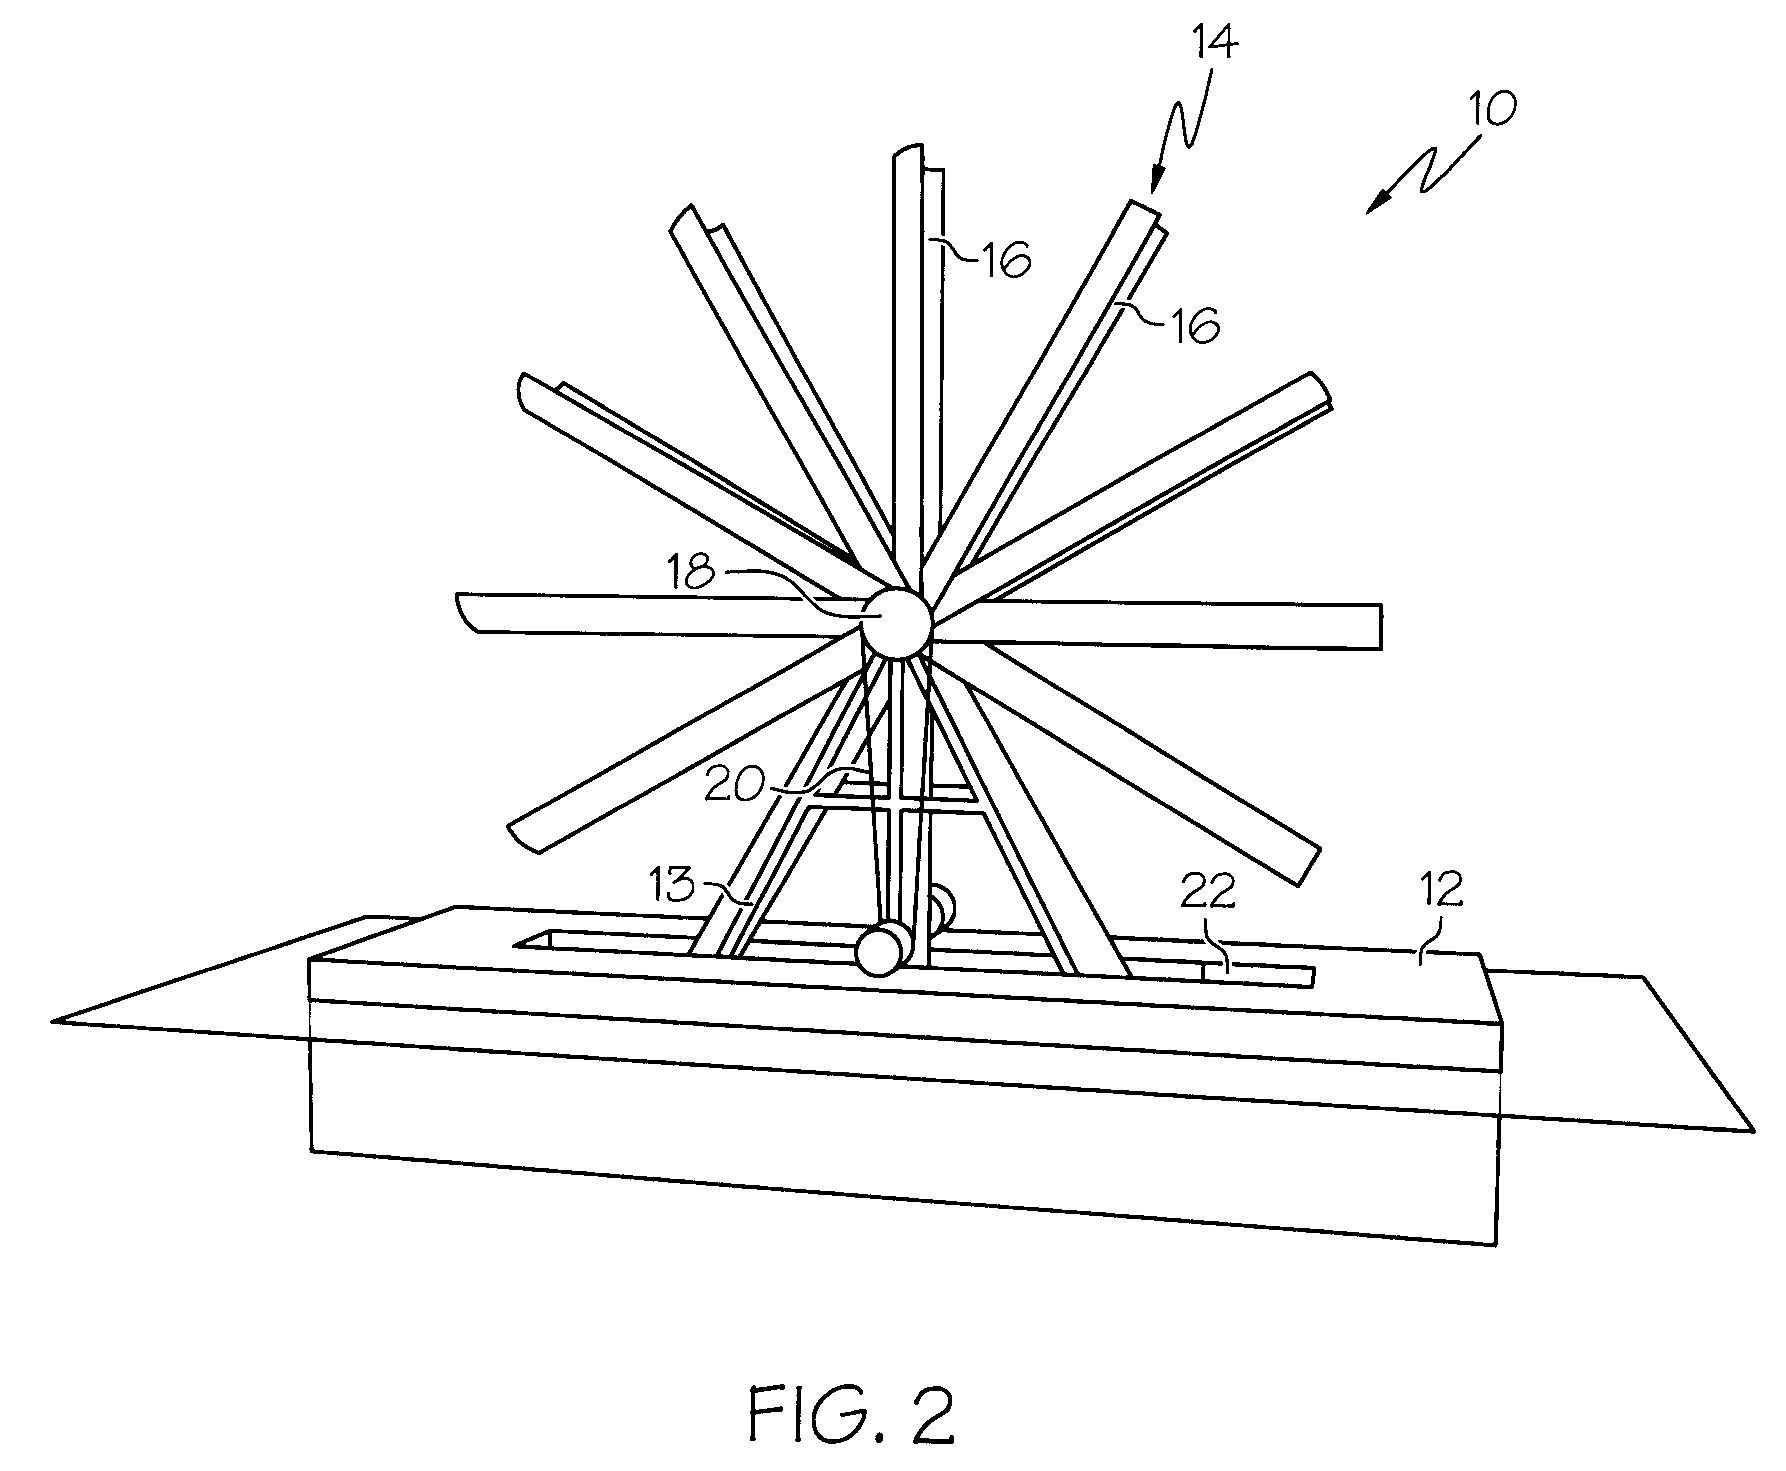 Hydroelectric device